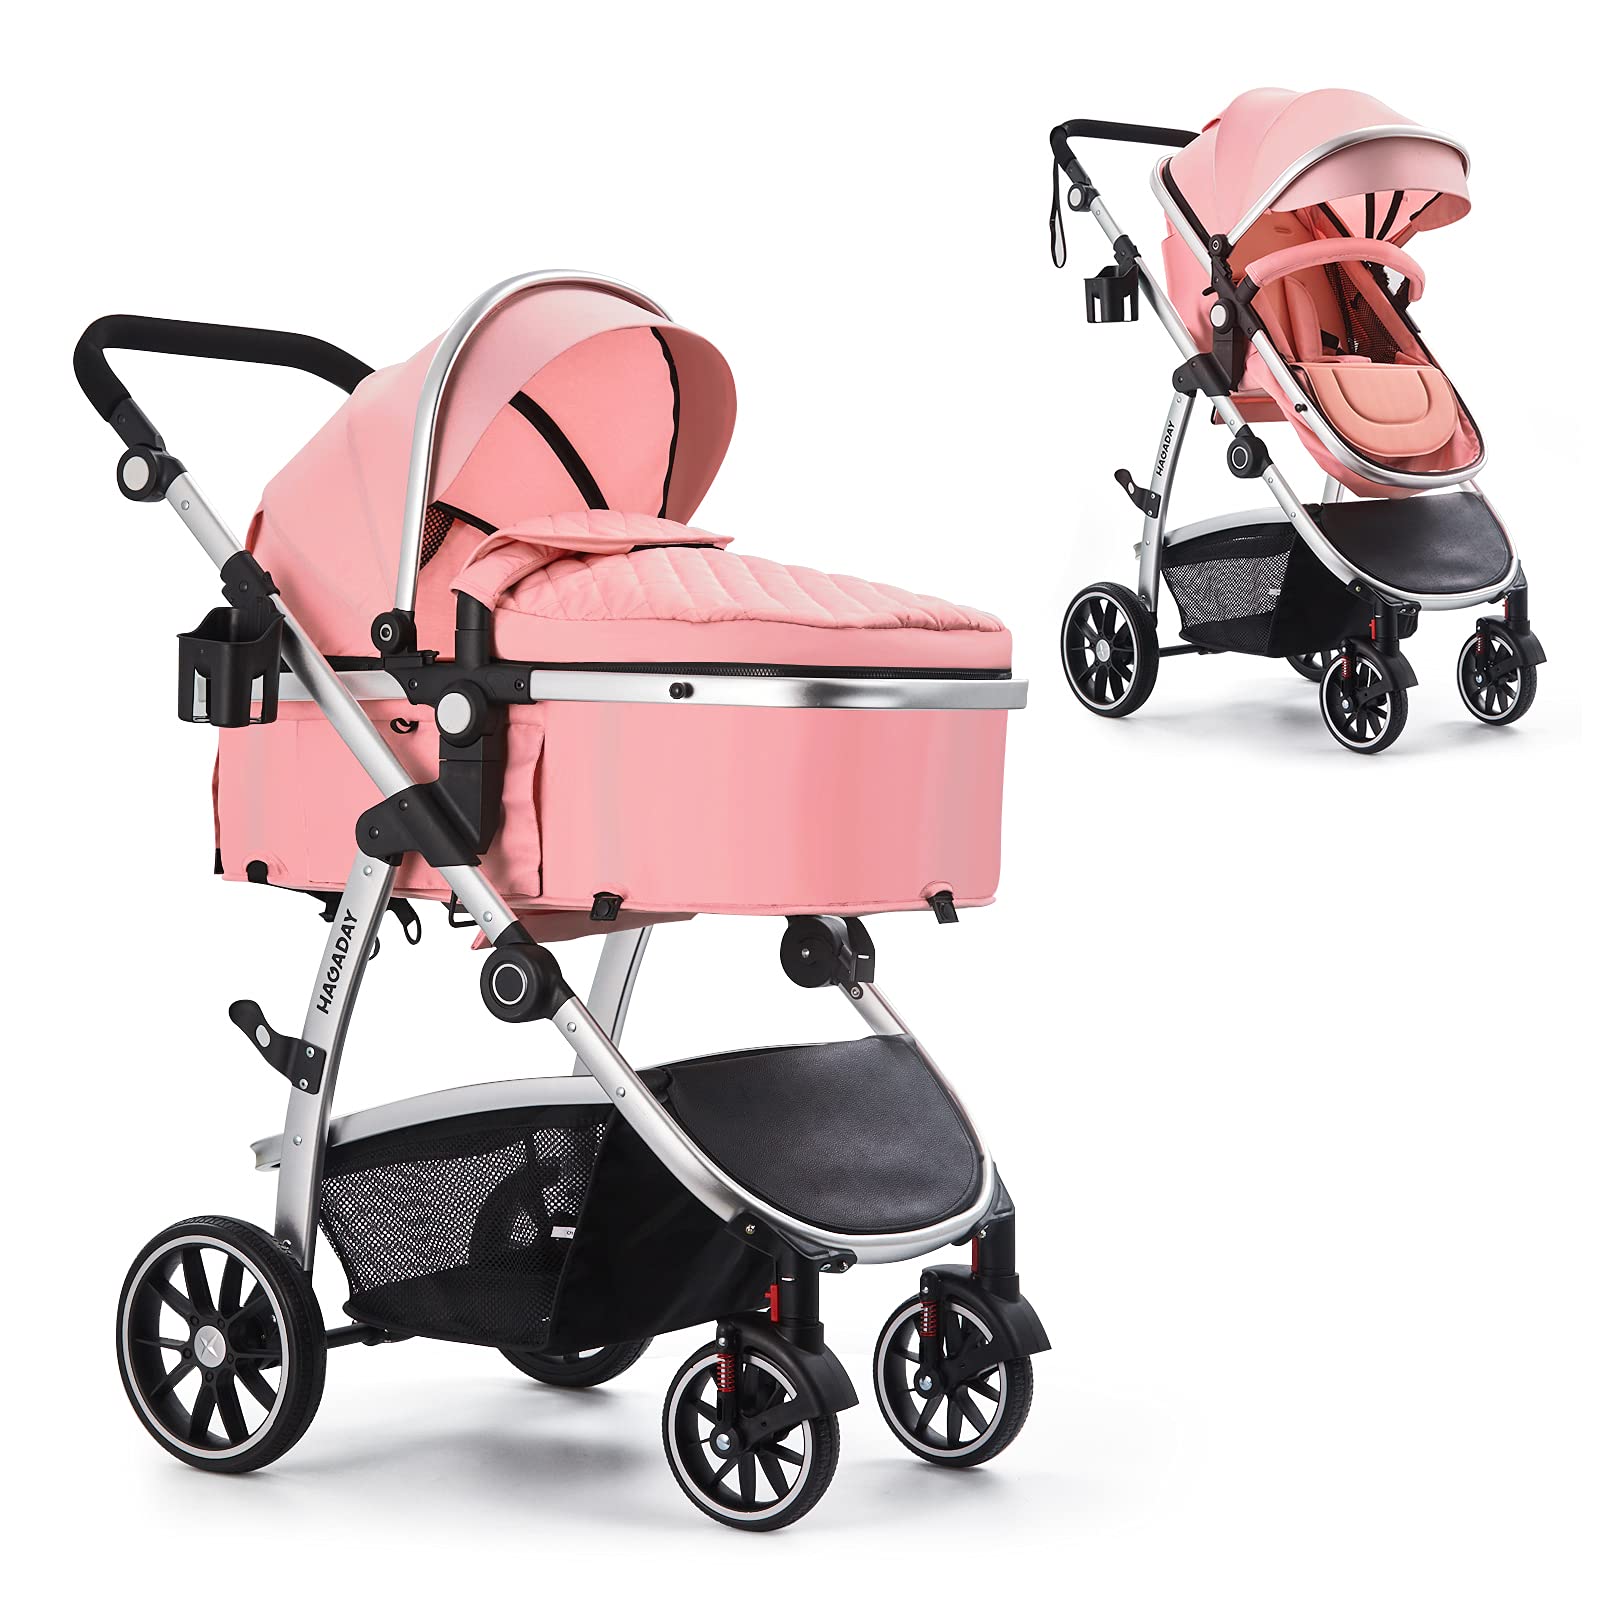 HAgADAY Baby Stroller, Infant Stroller with Reversible Seat, Newborn Stroller with canopy,Baby Bassinet Stroller(Pink)